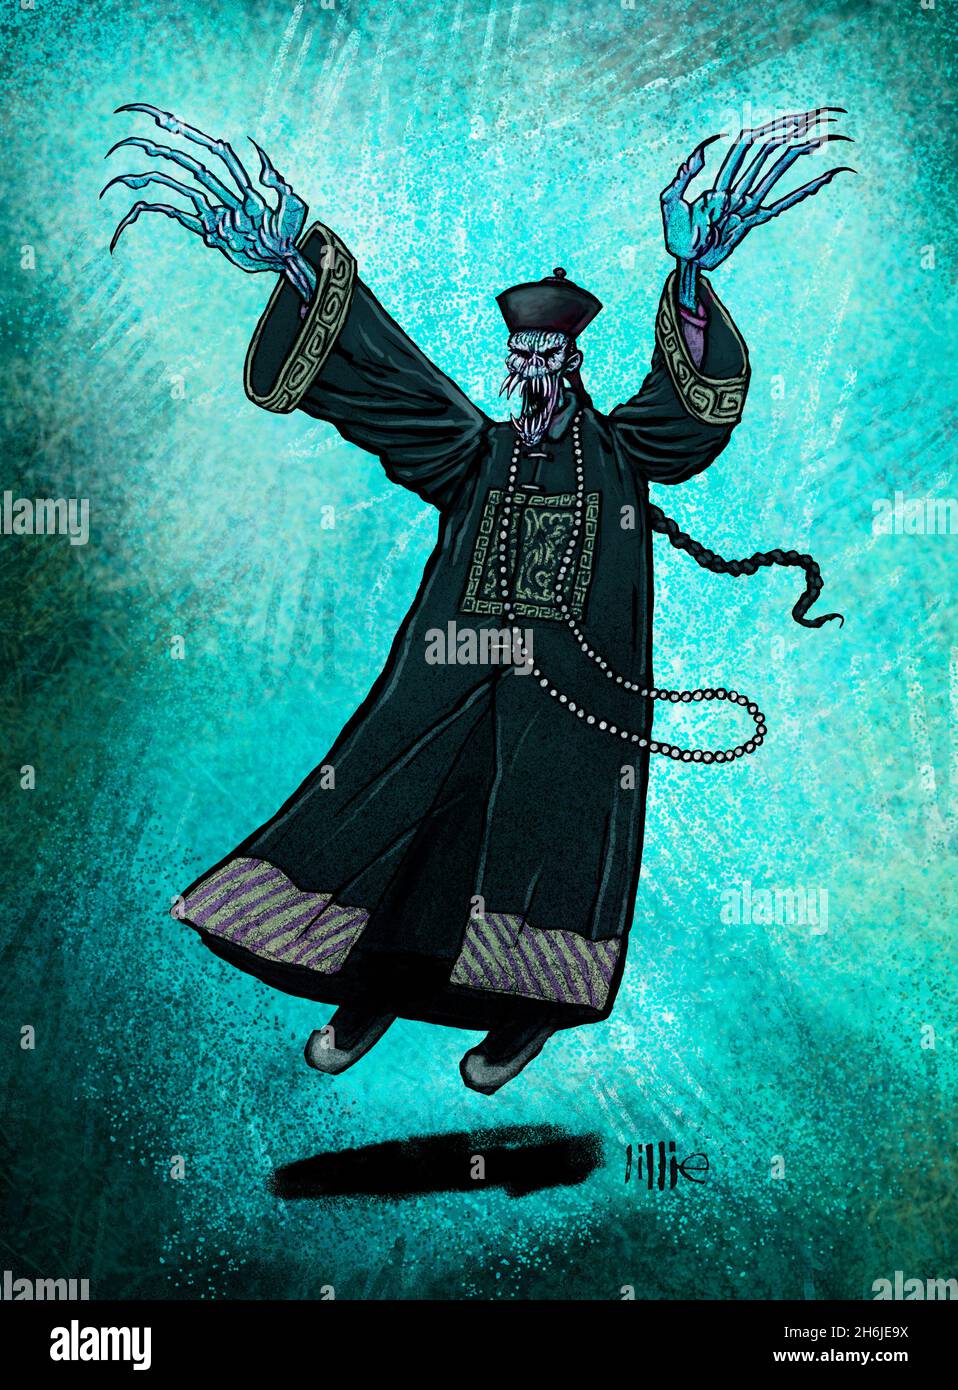 Art illustration of a Chiang Shih or jiangshi, a Chinese hopping vampire, or reanimated corpse depicted in legend, folklore, literature, TV and film. Stock Photo